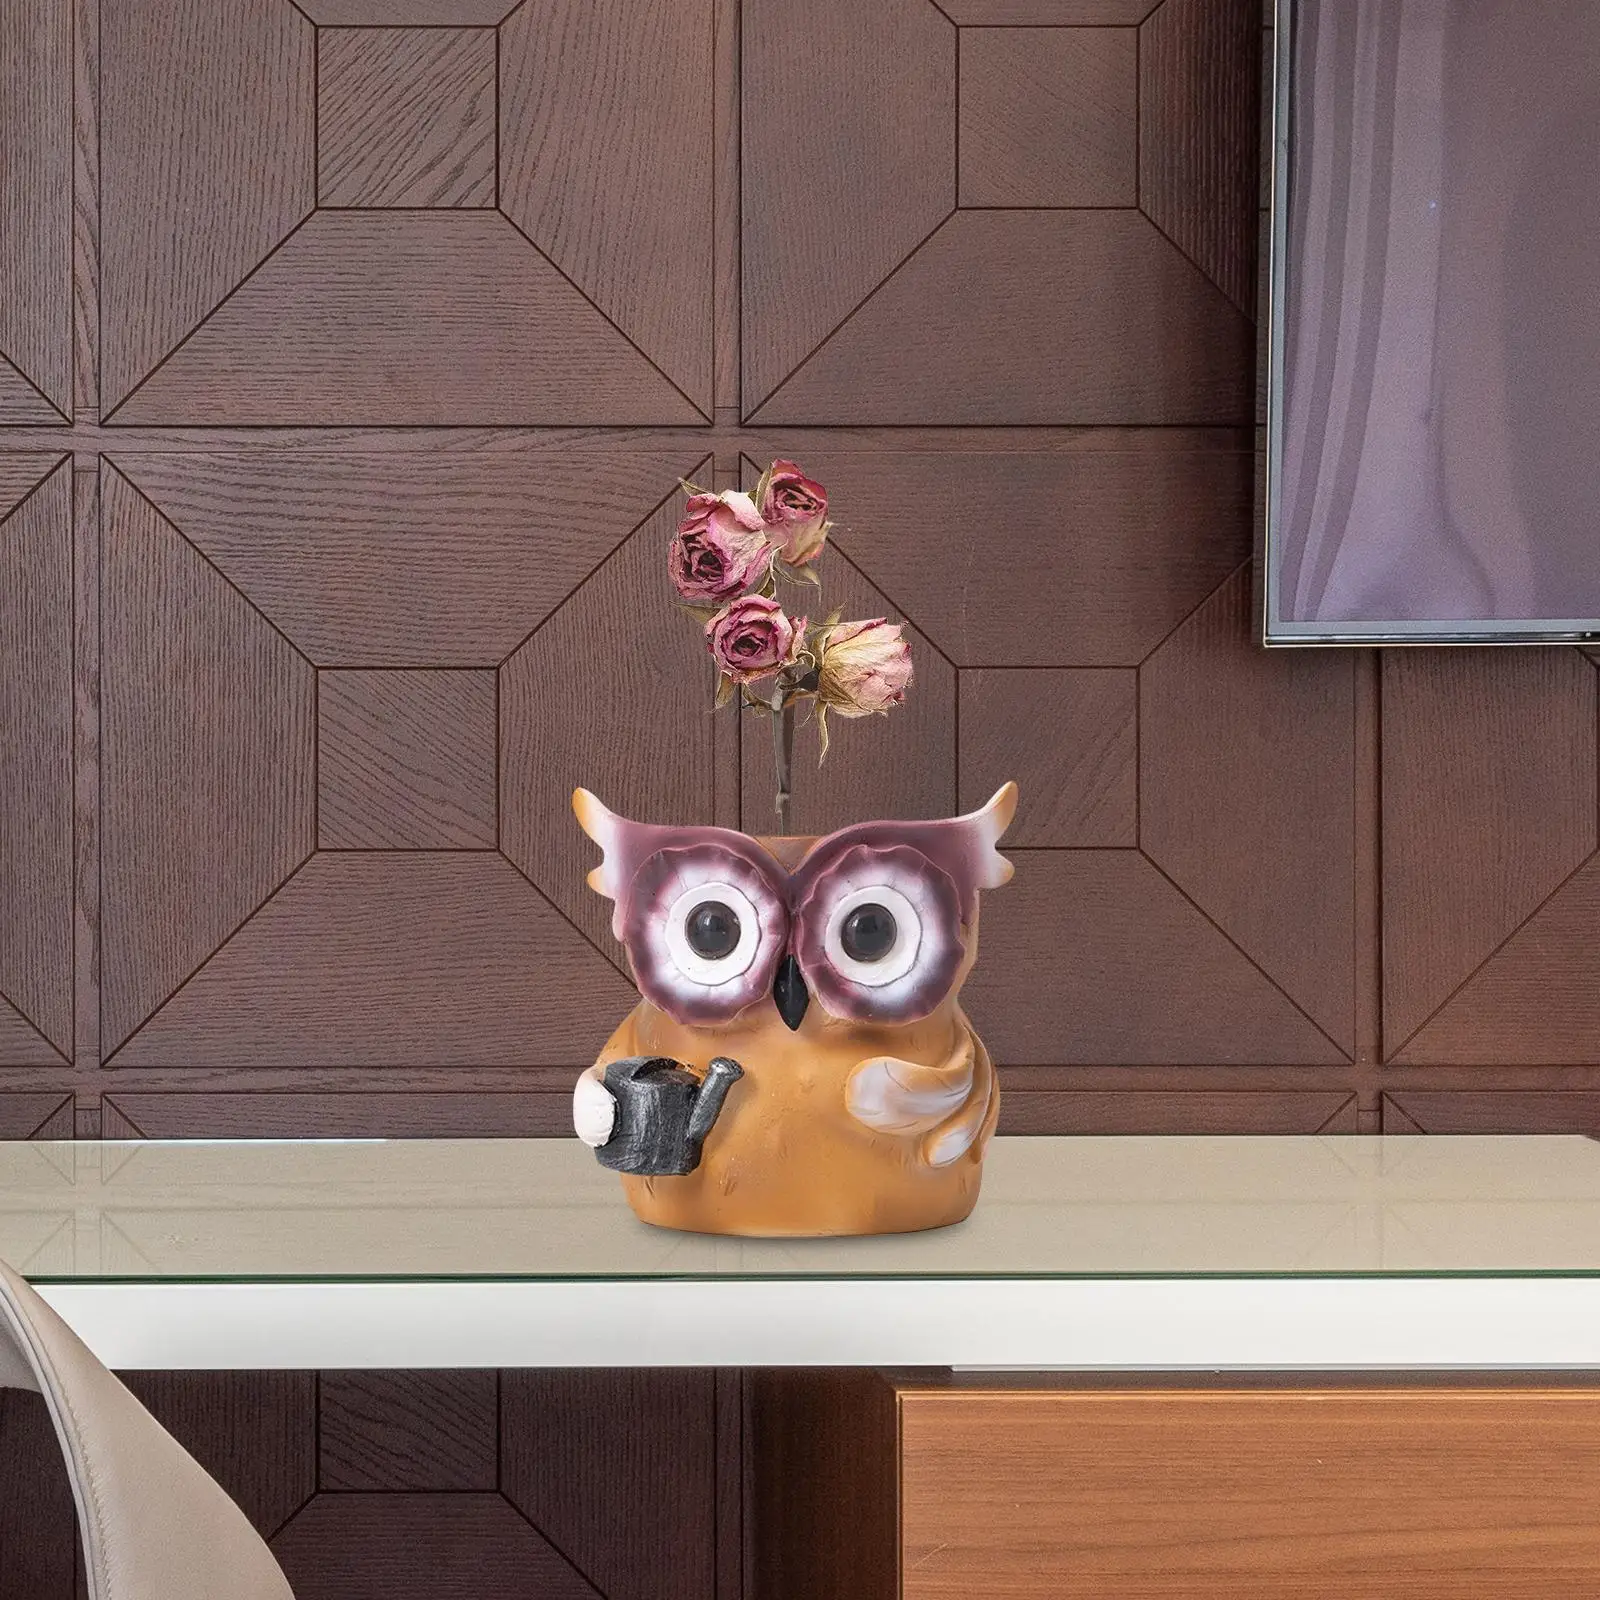 Owl Flower Pot Statue Cute Art Ornament Creative Owl Flower Pot Figurine for Office Table Cabinet Entry Home Decor Accents